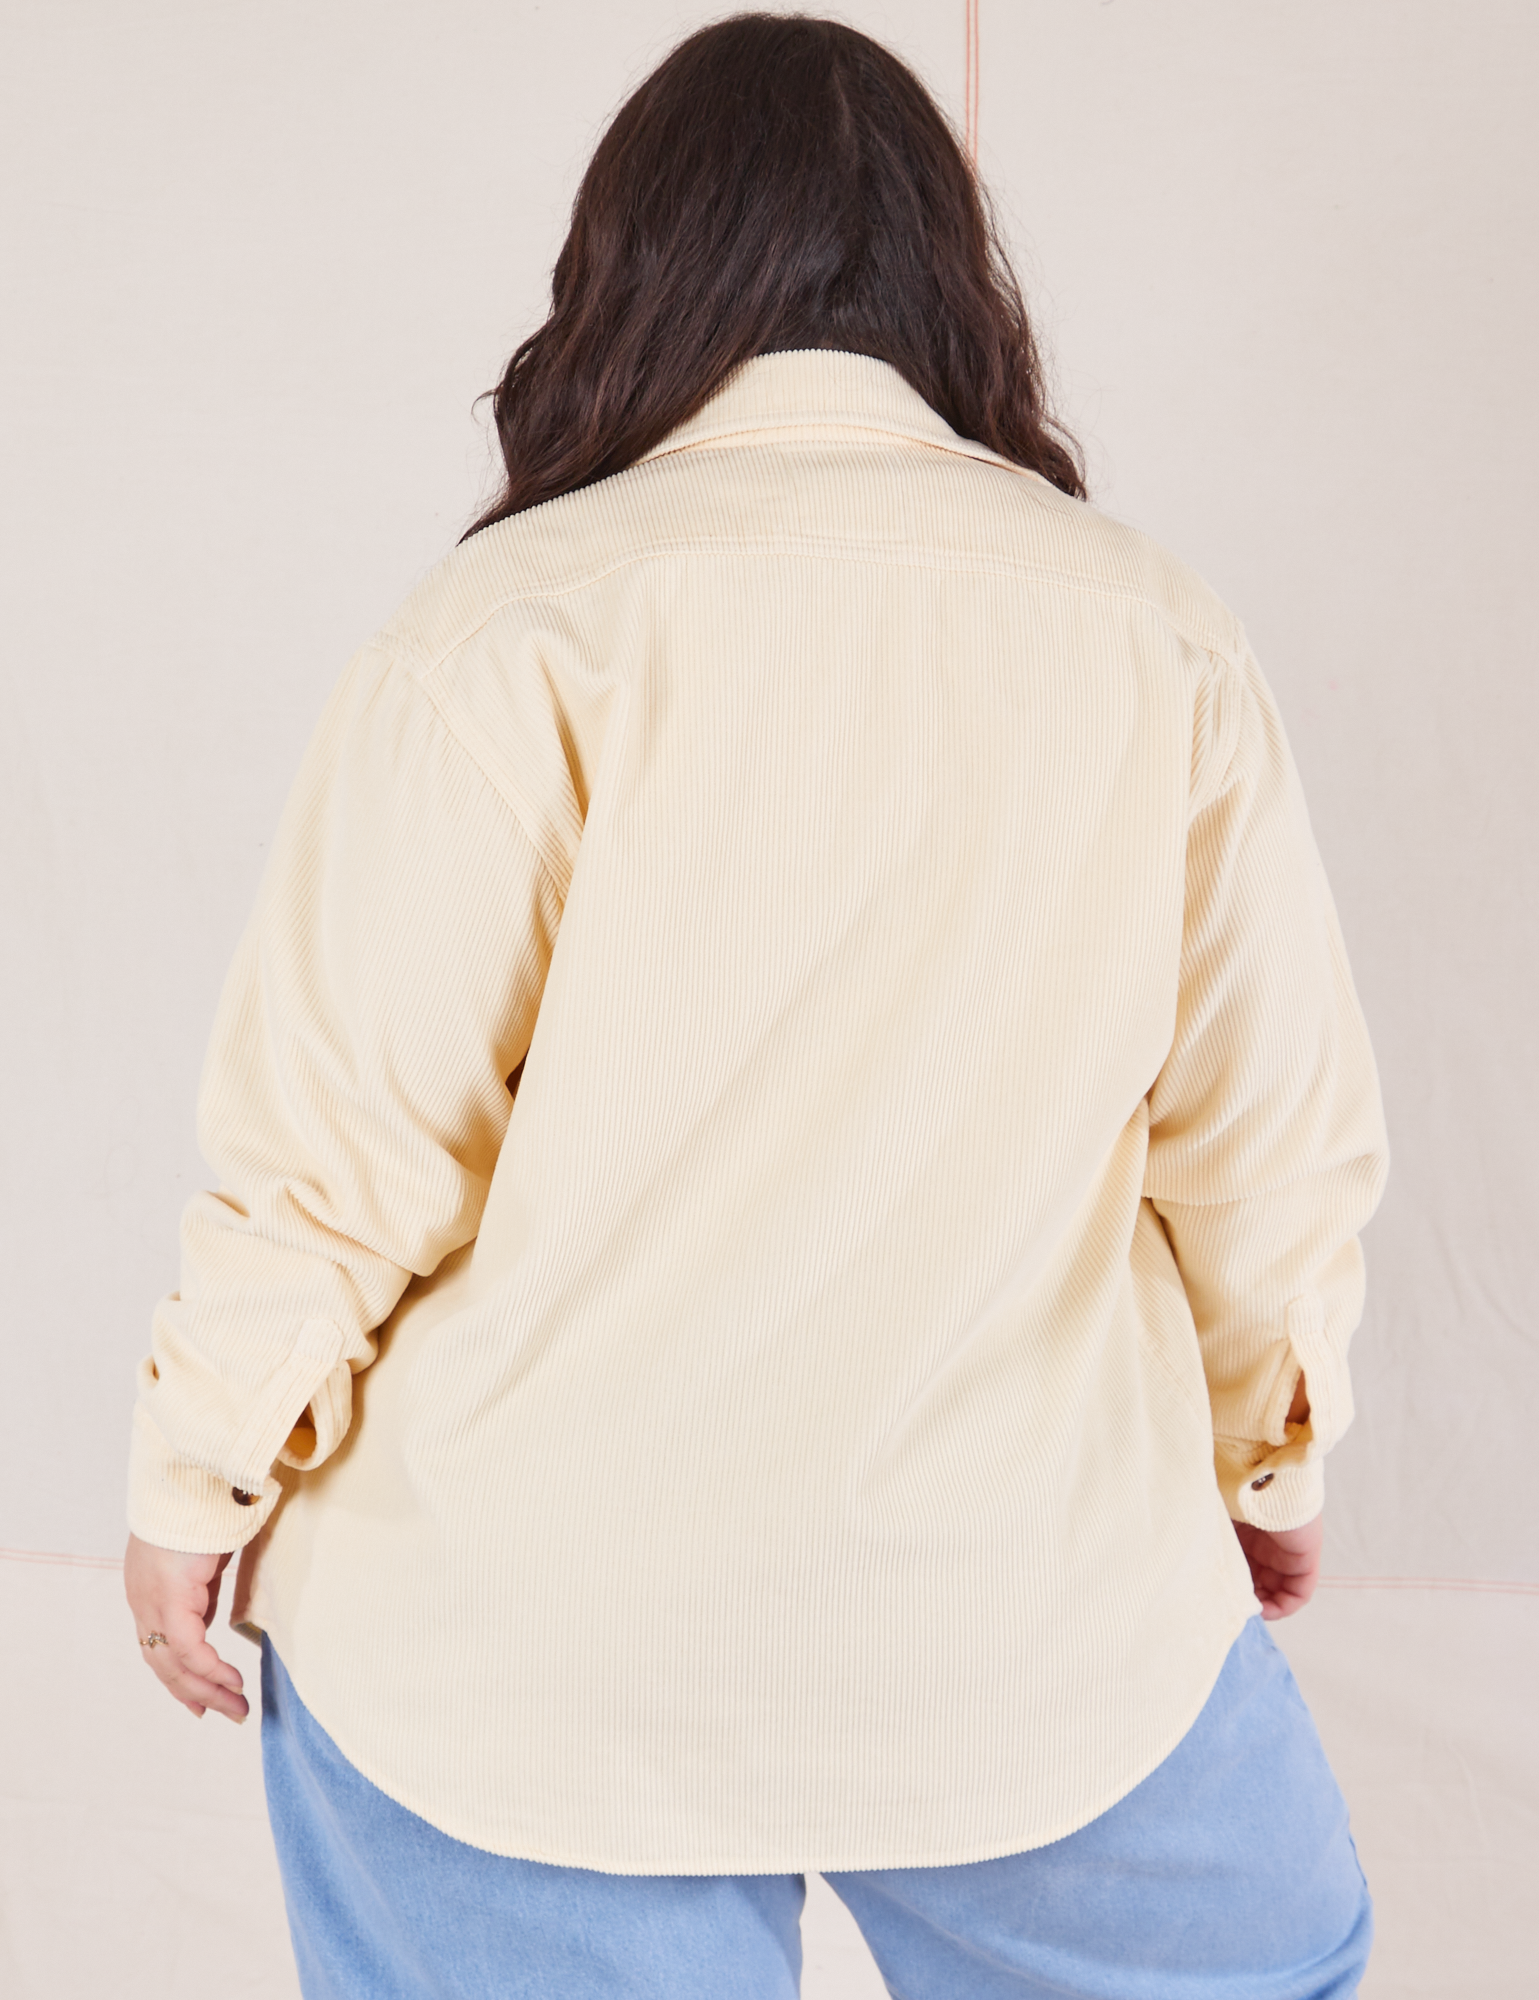 Corduroy Overshirt in Vintage Off-White back view on Ashley